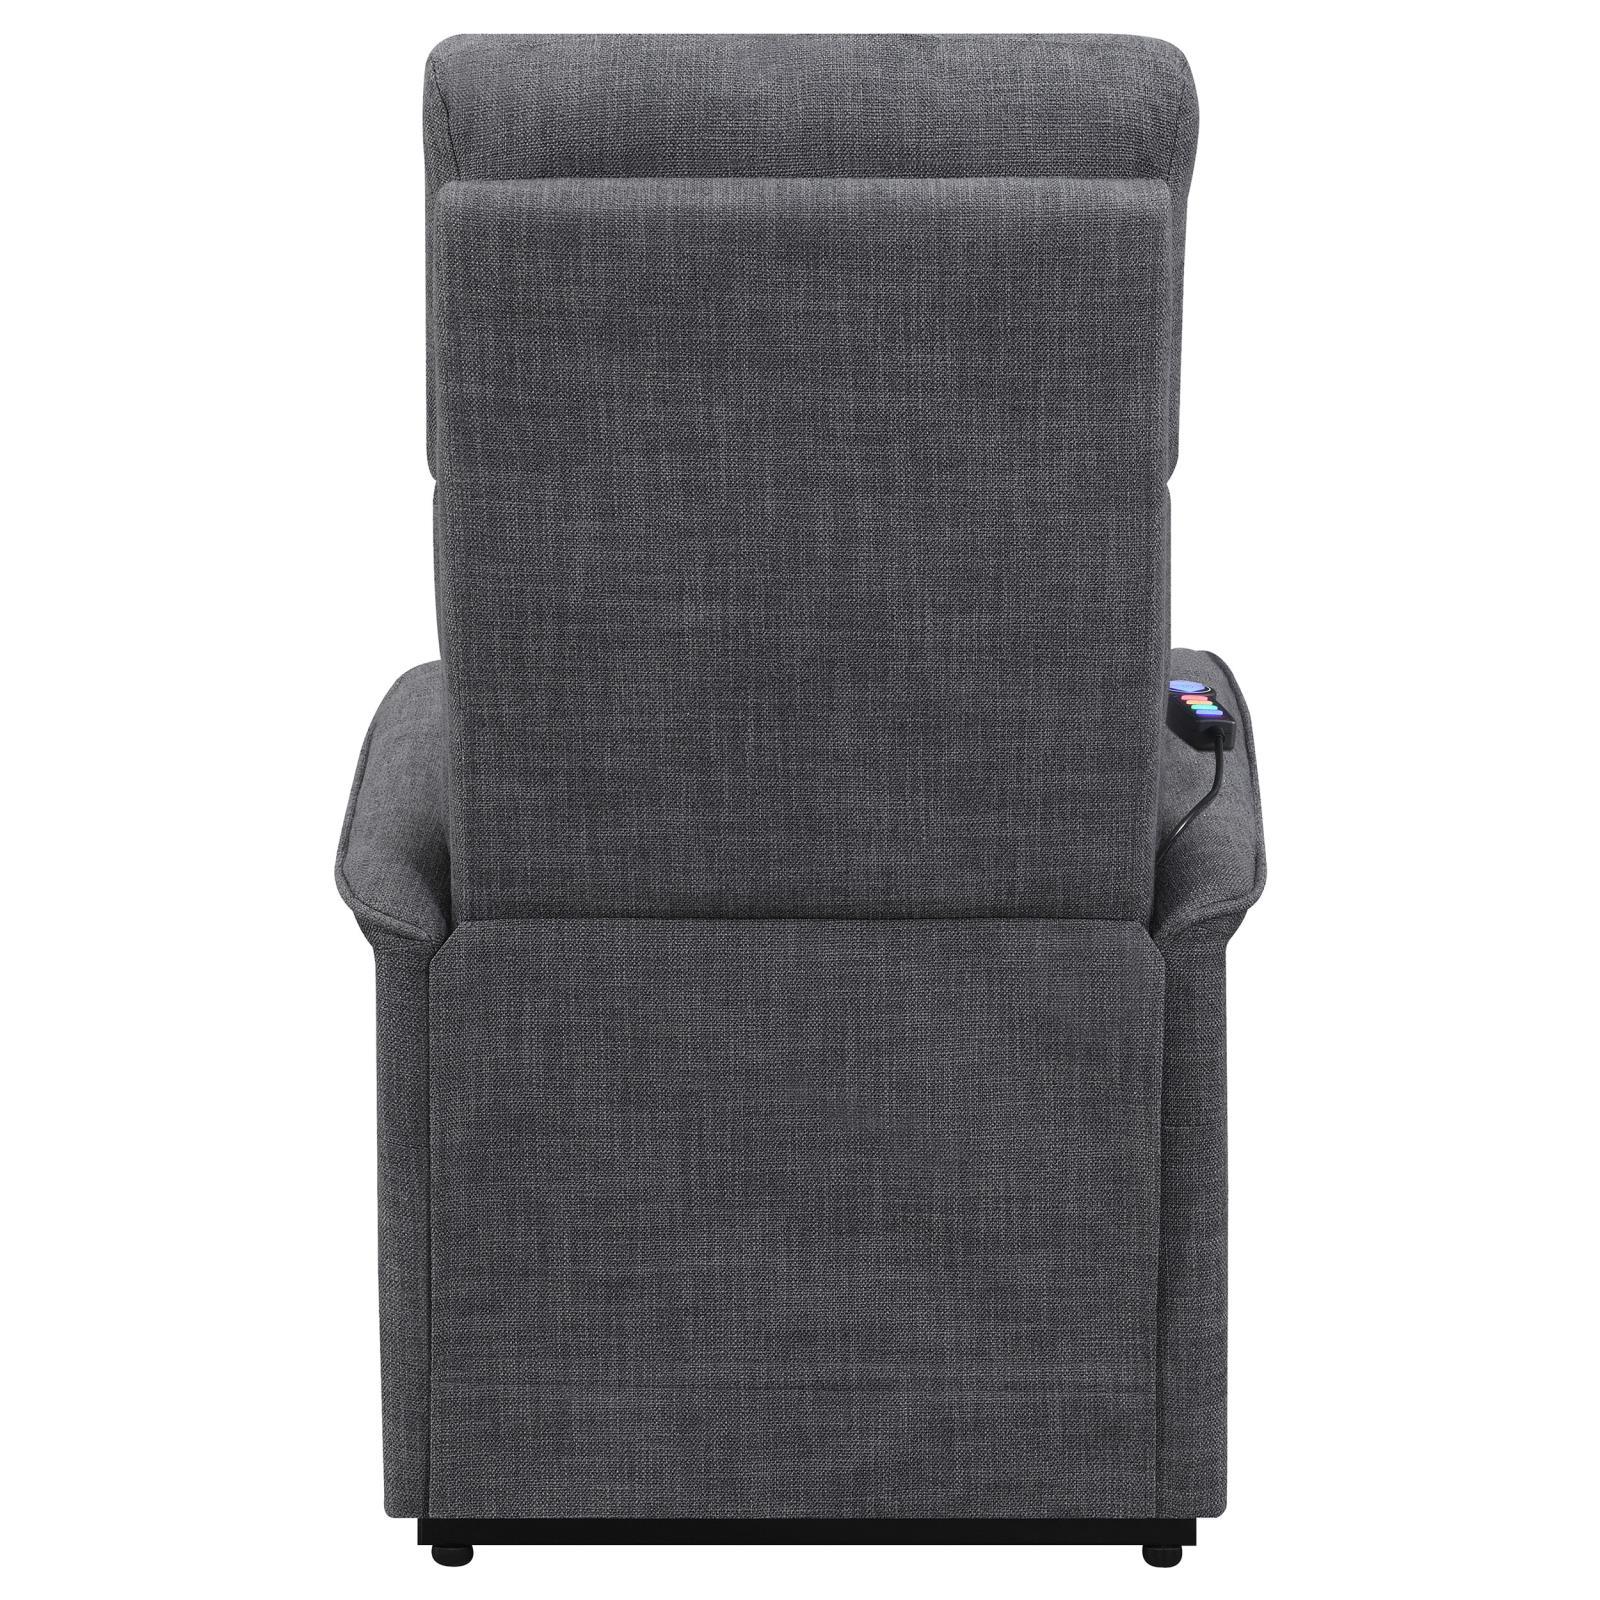 Herrera Power Lift Recliner with Wired Remote Charcoal - Half Price Furniture